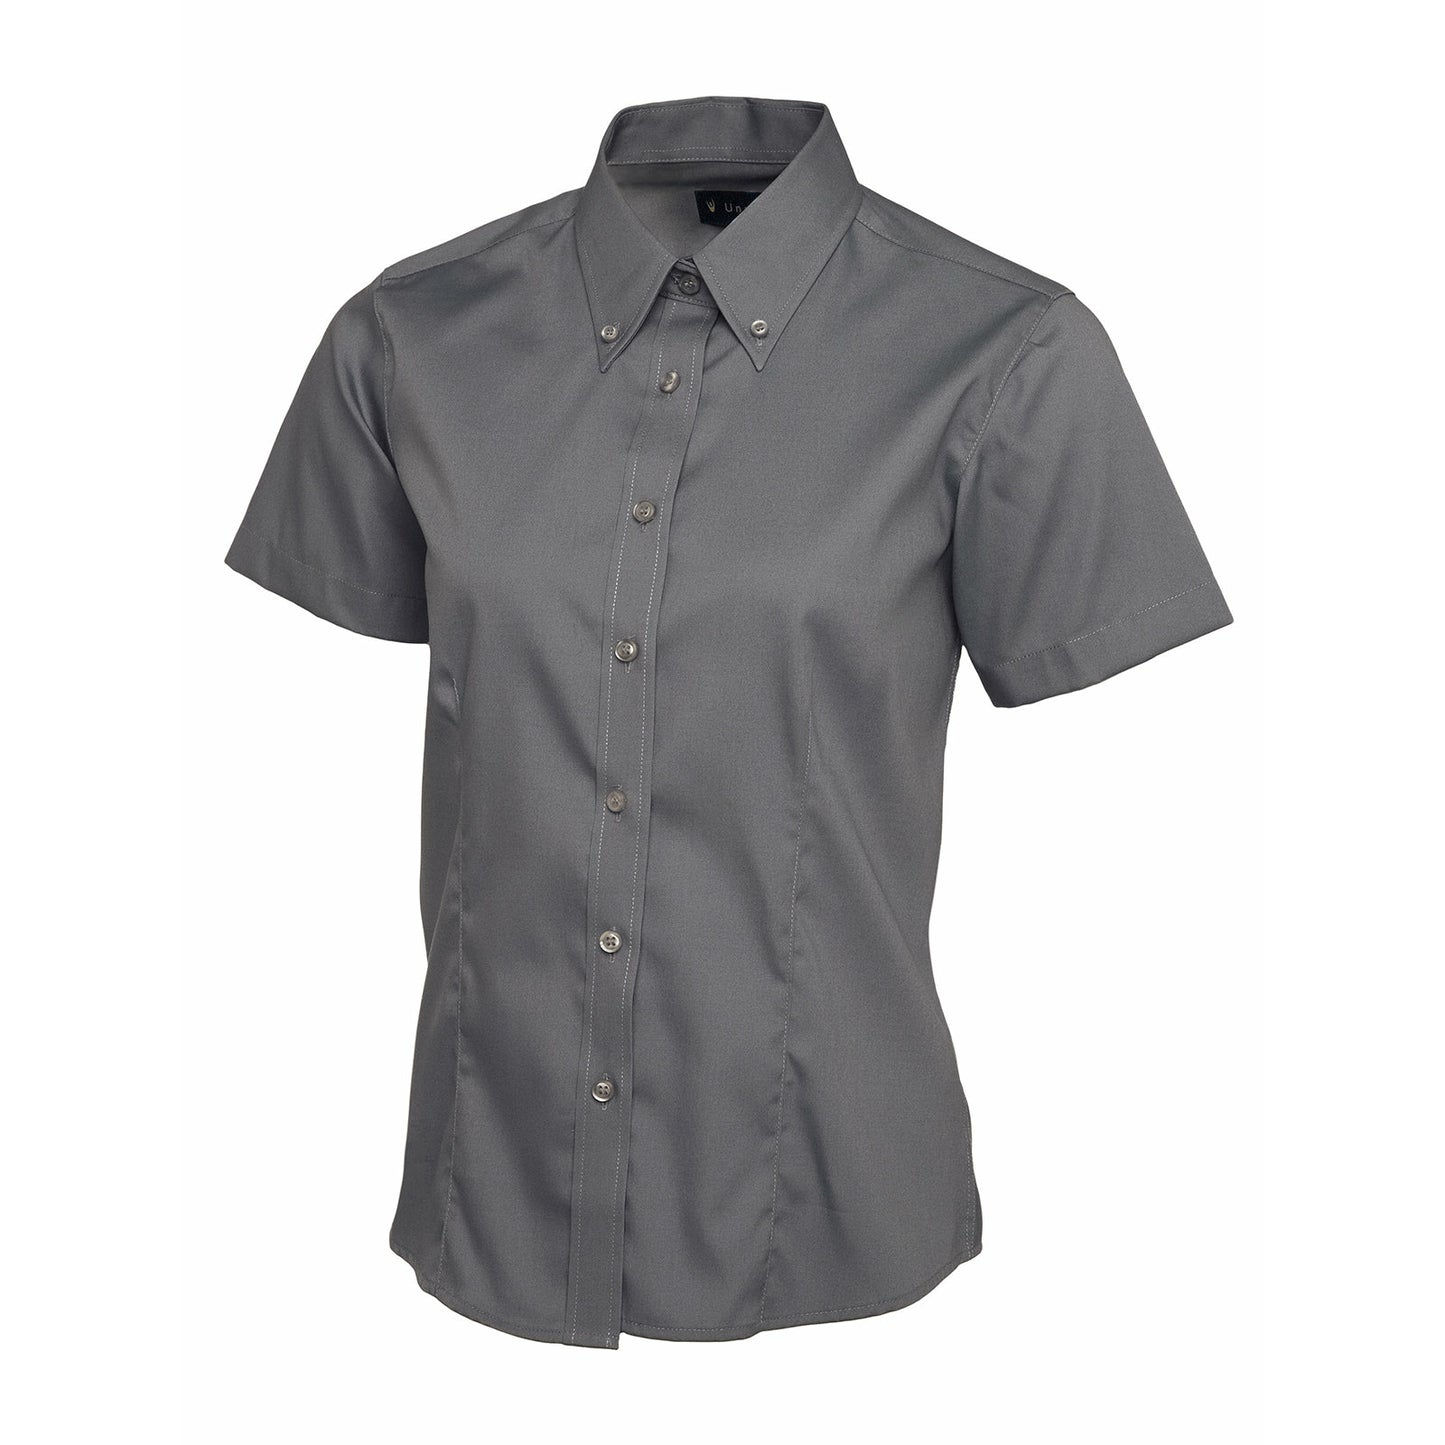 Ladies Pinpoint Oxford Half Sleeve Shirt - Charcoal